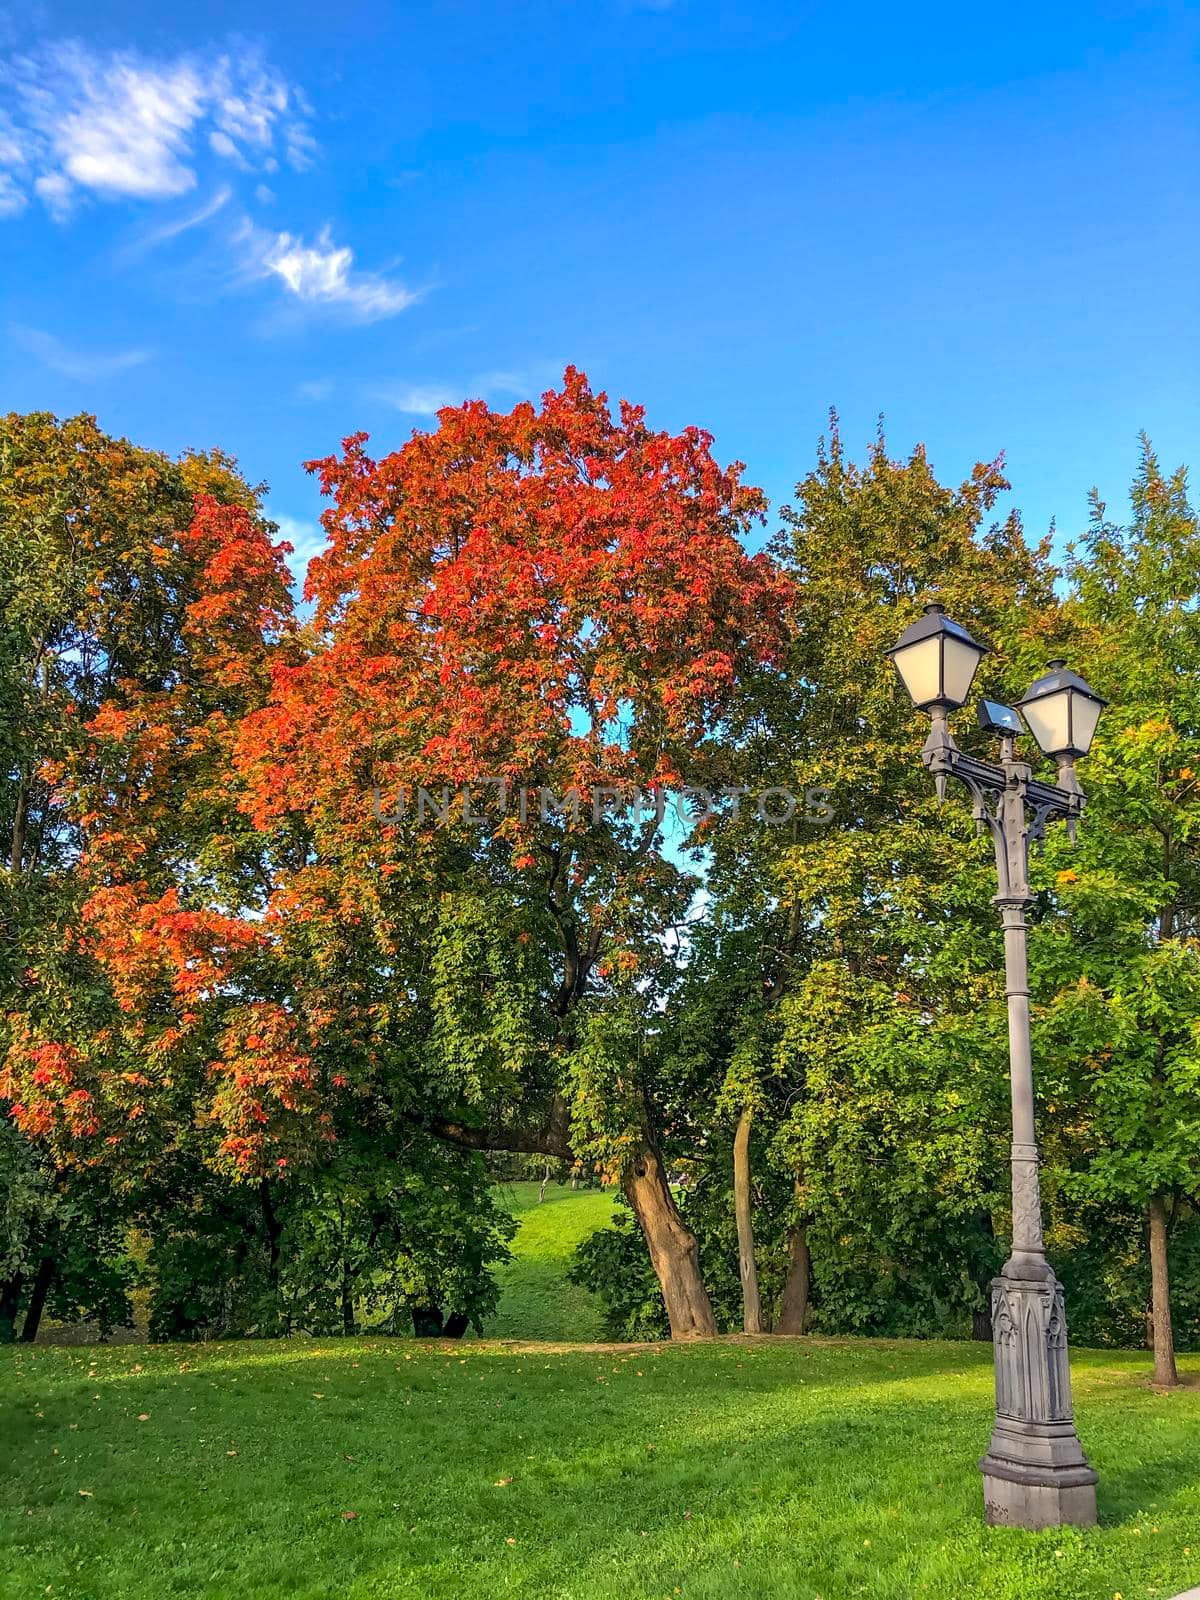 Colourful Nature: Autumn Beauty in the Park - stock photo by kaliaevaen